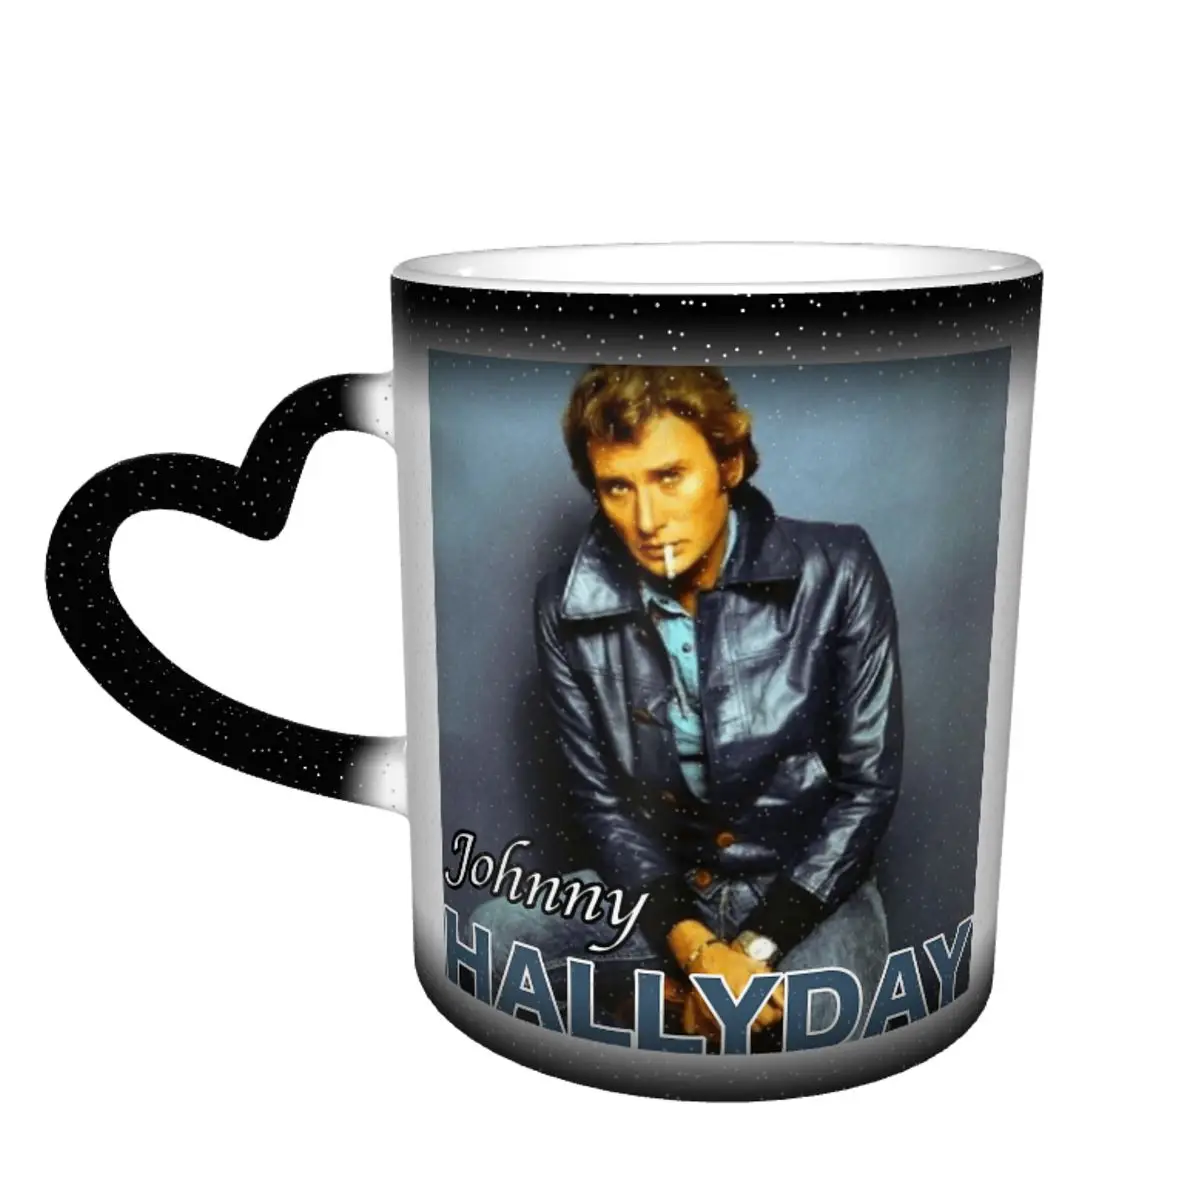 

Color Changing Mug in the Sky Johnny And Hallyday Poster Funny R337 Ceramic Heat-sensitive Cup Funny Novelty Milk cups